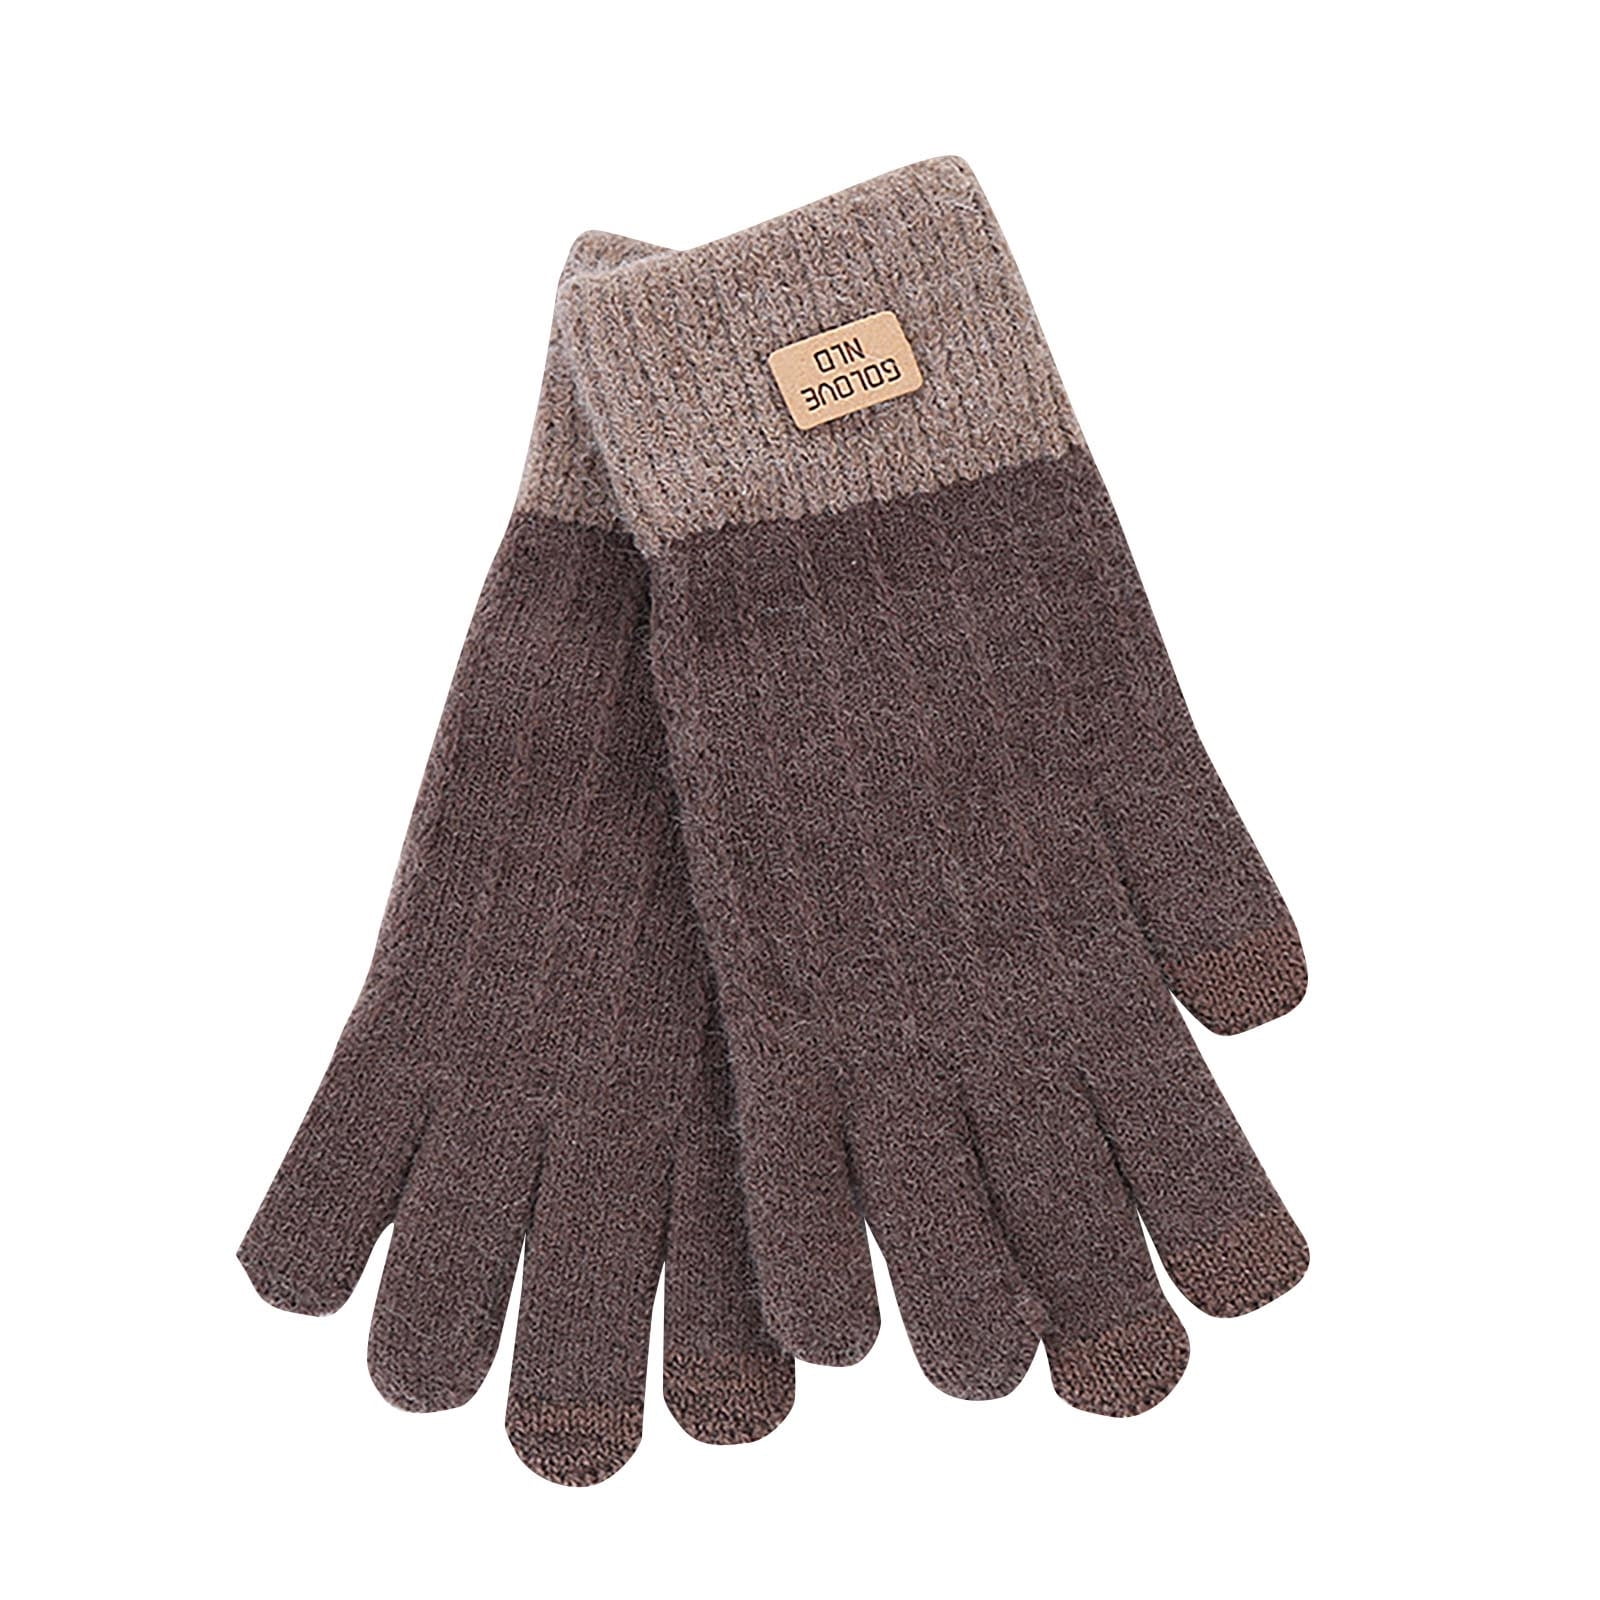 X-Large Kinco 5299-XL Alyeska Ragg Wool Full Finger Glove with Thermal Lining 